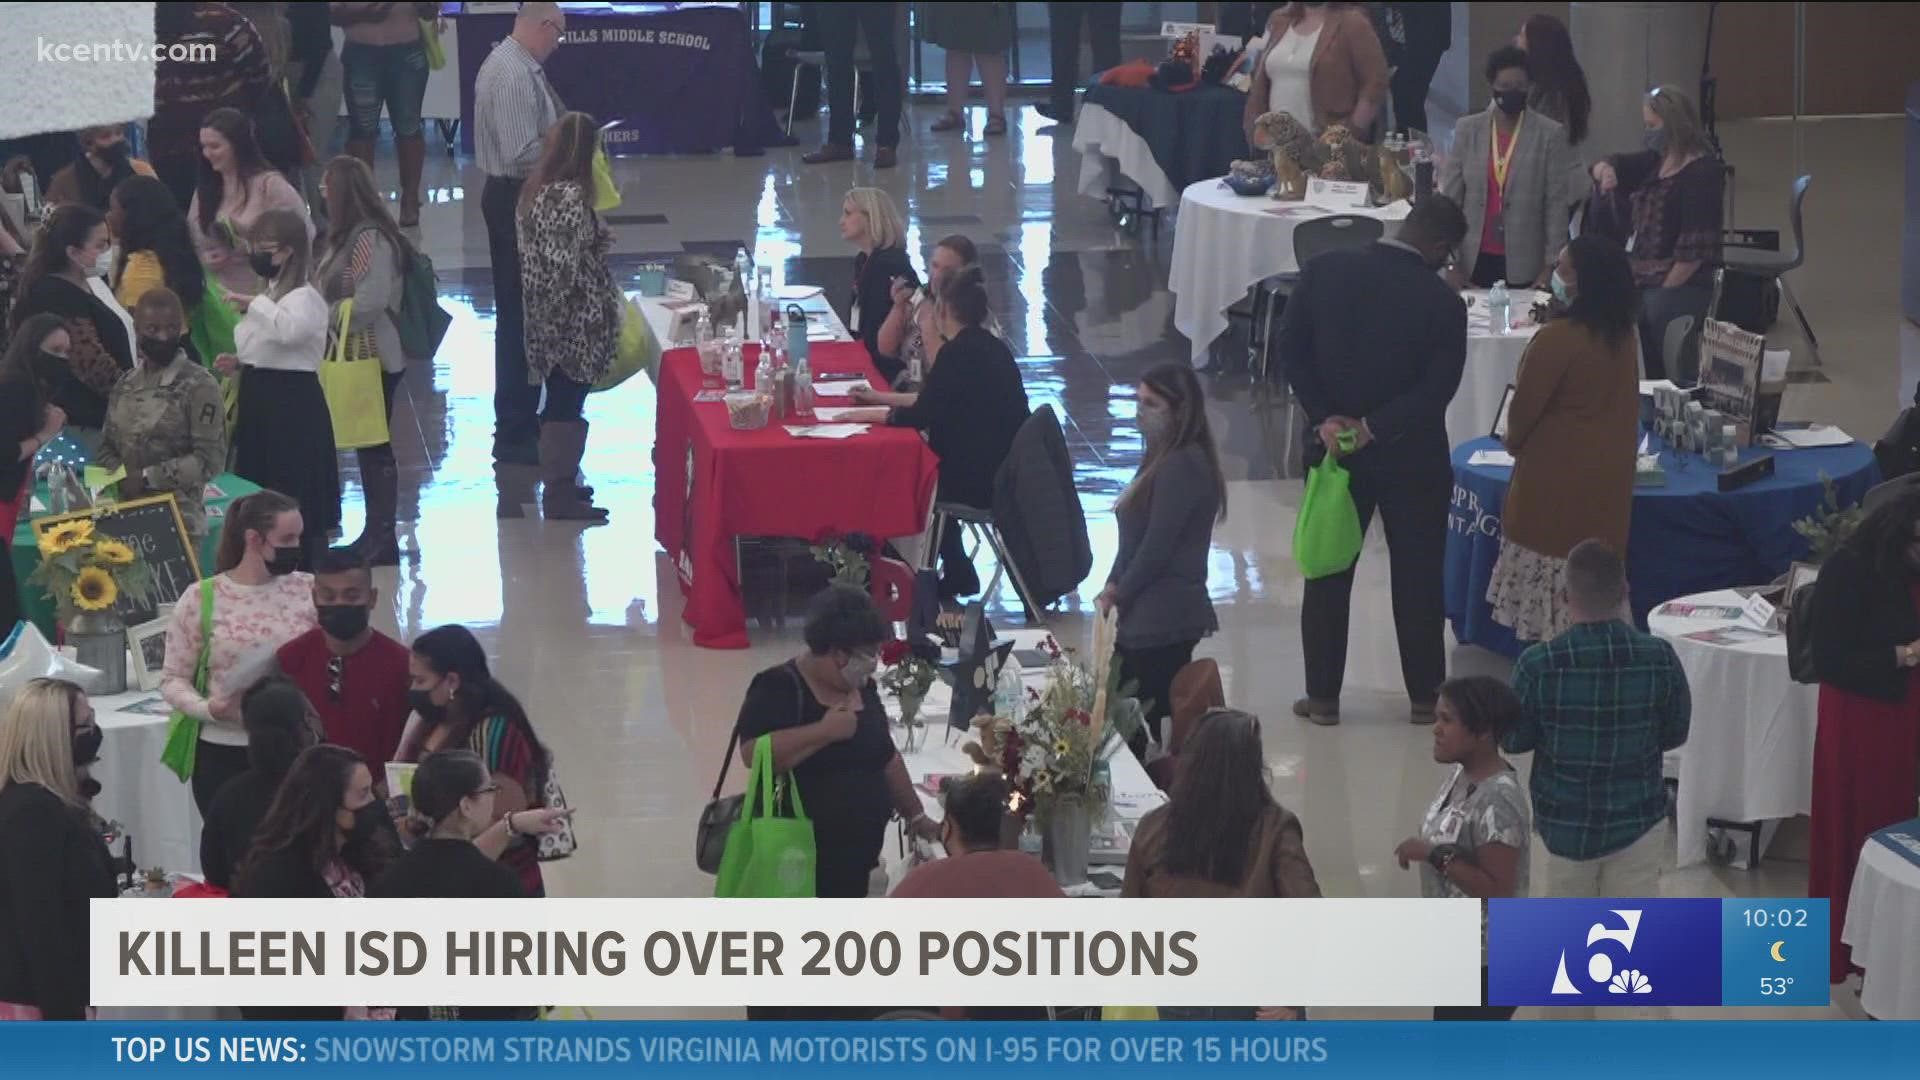 Killeen ISD had more than 600 people attend the job fair.